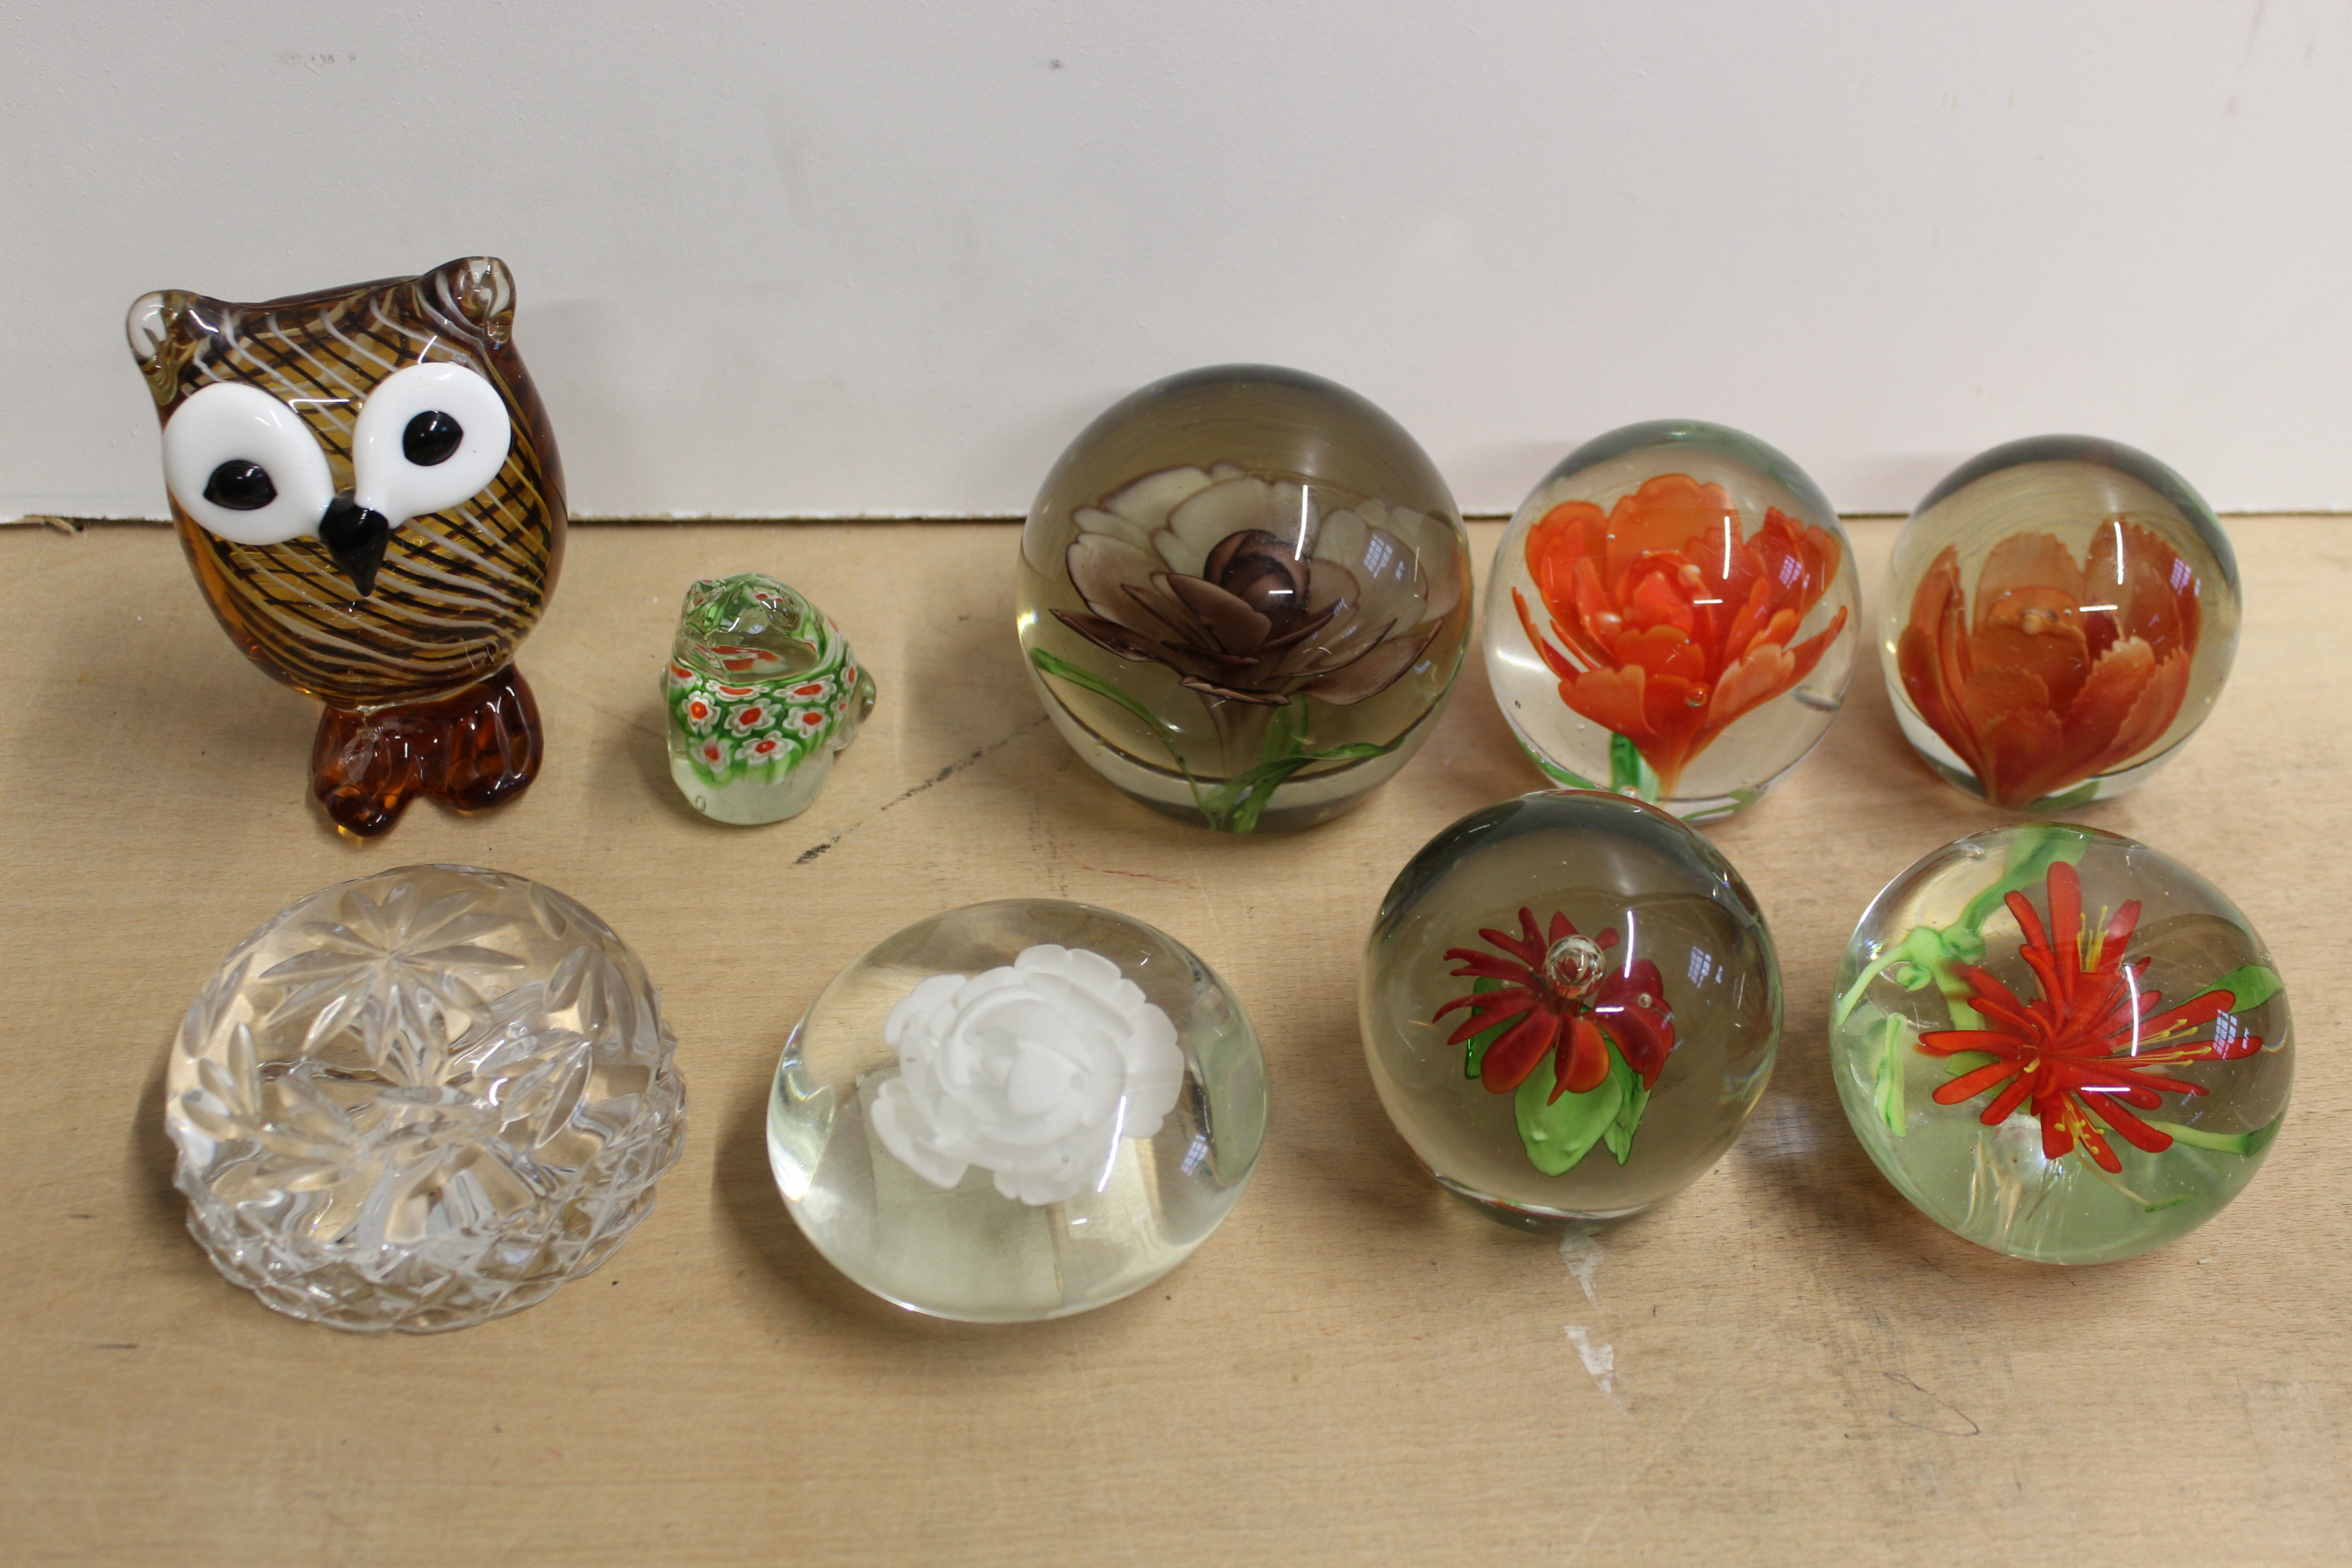 A selection of paperweights including an owl,